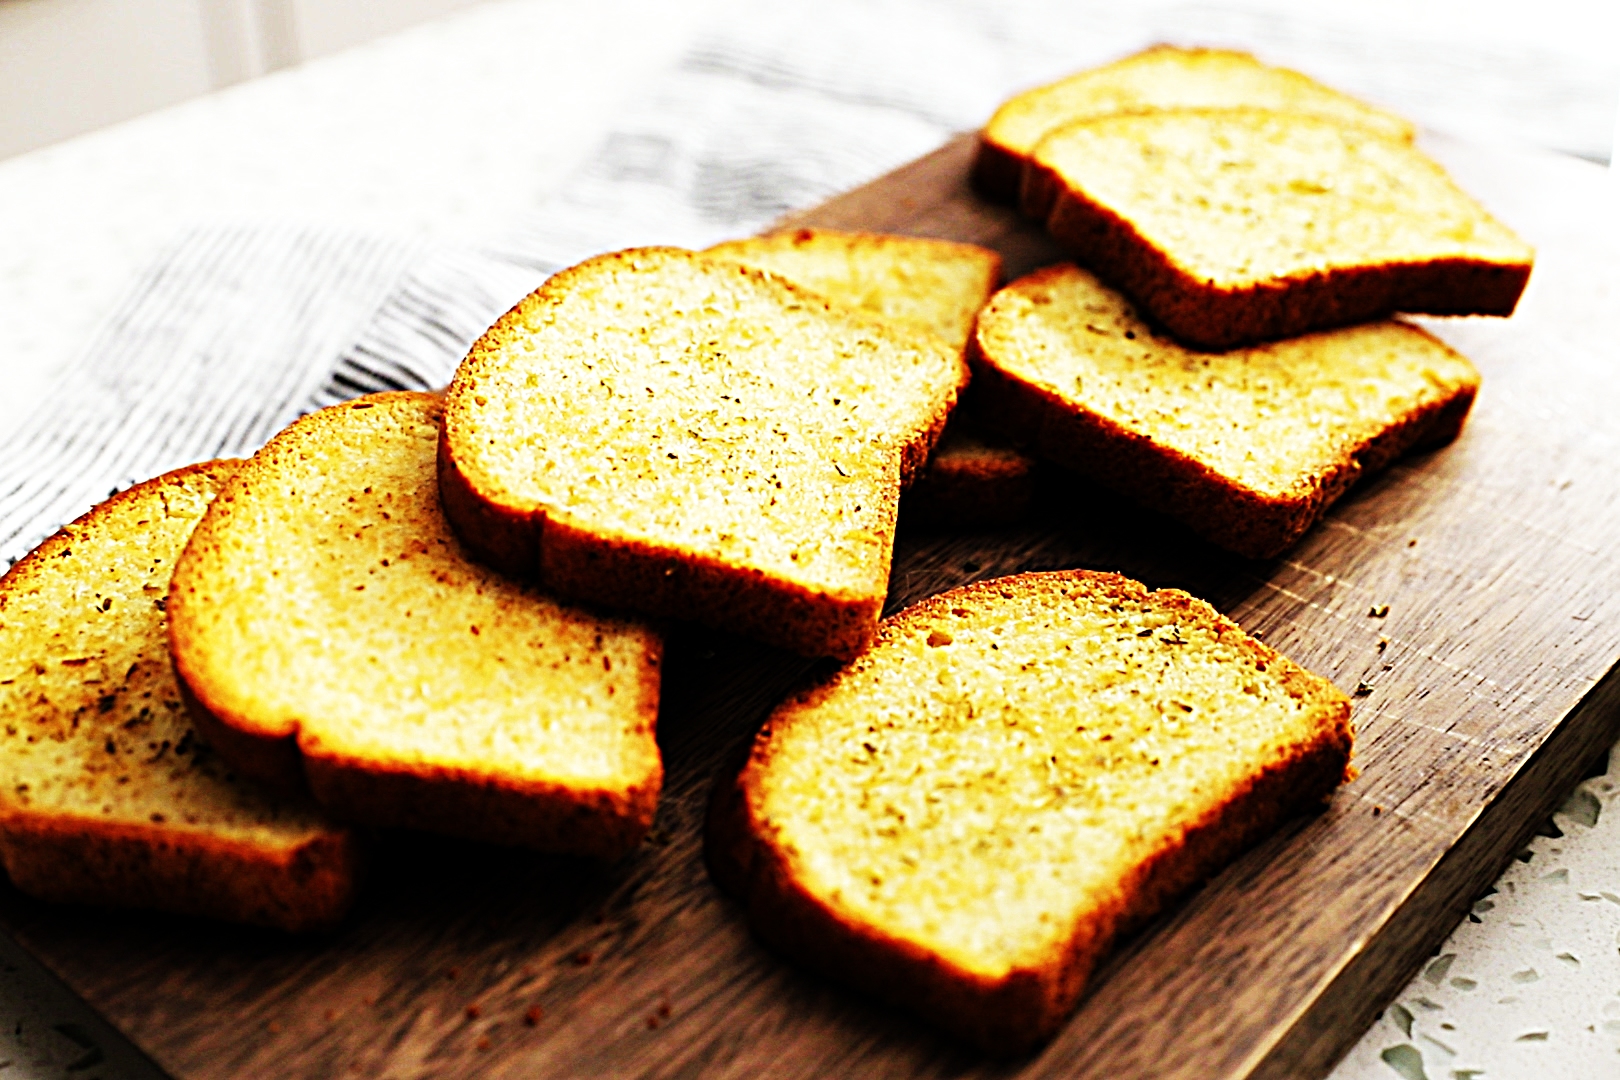 Stupid-Easy Recipe for Gluten-Free Garlic Toast (#1 Top-Rated)